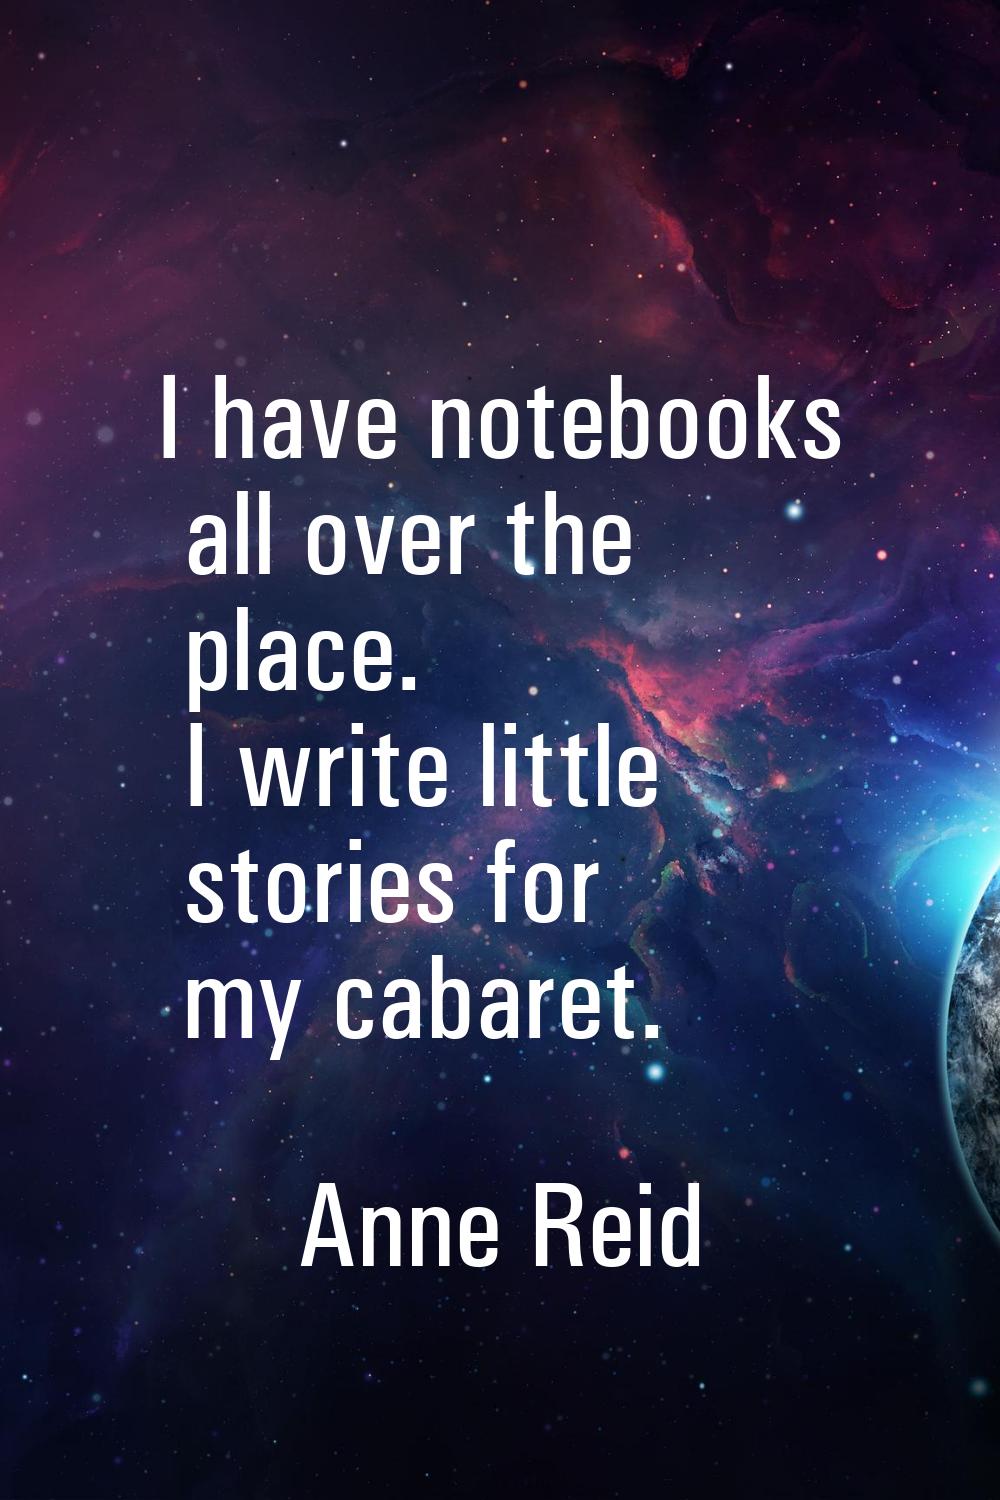 I have notebooks all over the place. I write little stories for my cabaret.